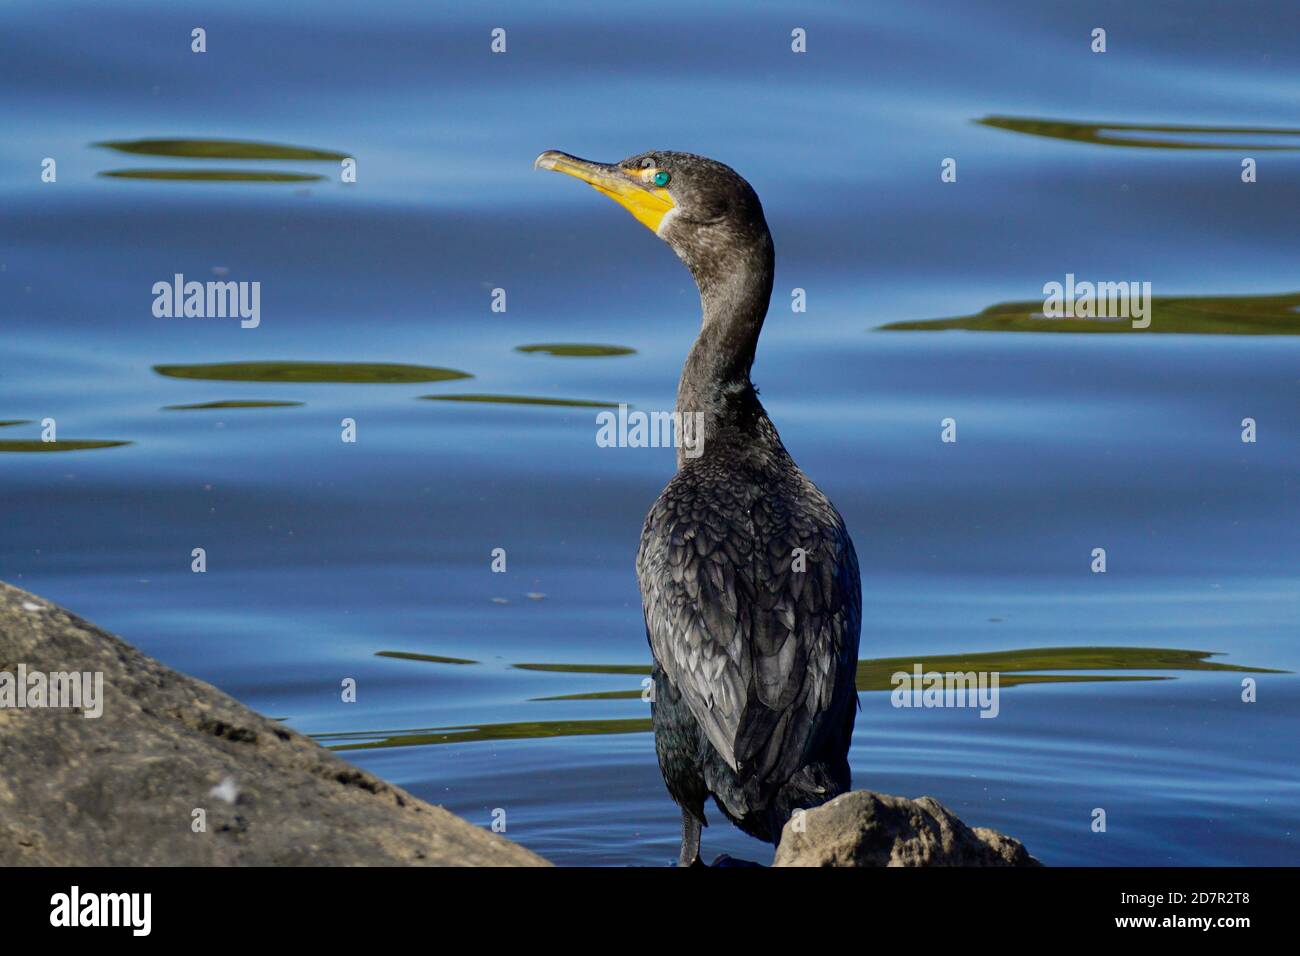 Green-eyed Cormorant by the water Stock Photo